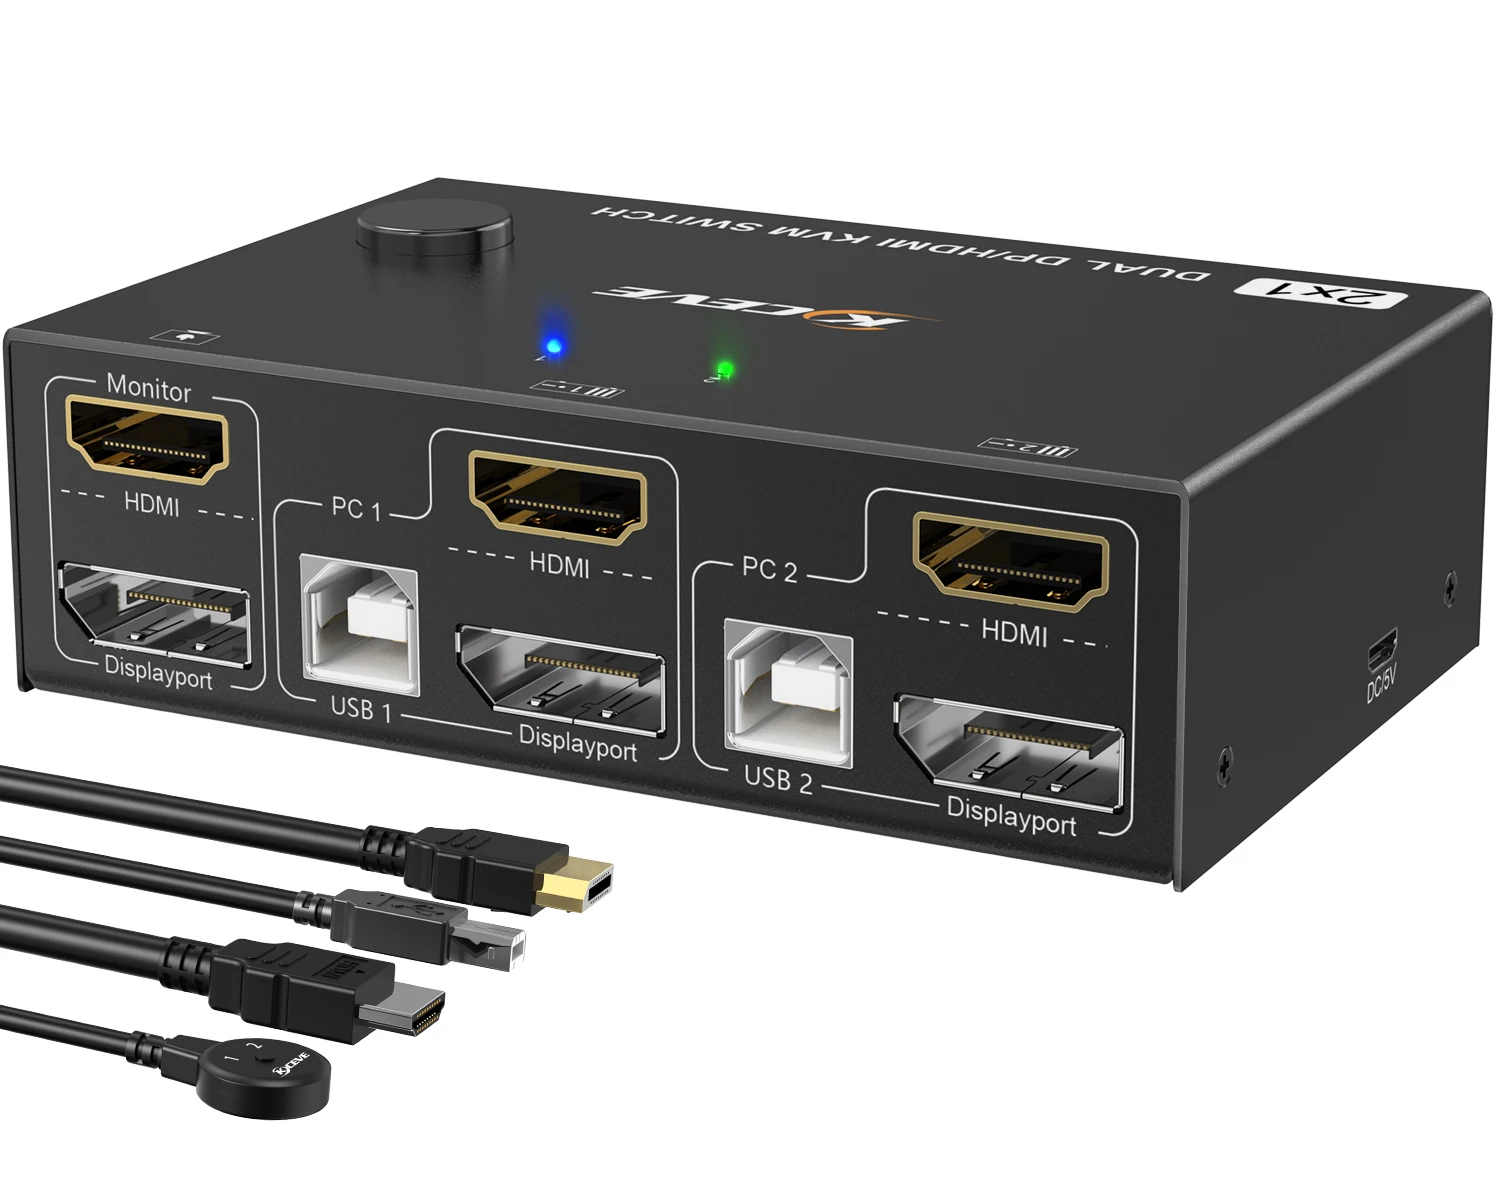 KCEVE Kvm Hdmi Switch For 2 Computers, 4K Hdmi Switcher Box 2 In 1 Out For  2 Pc Share Keyboard Mouse And Monitor Support 4K@30Hz, With Usb Hub Ports